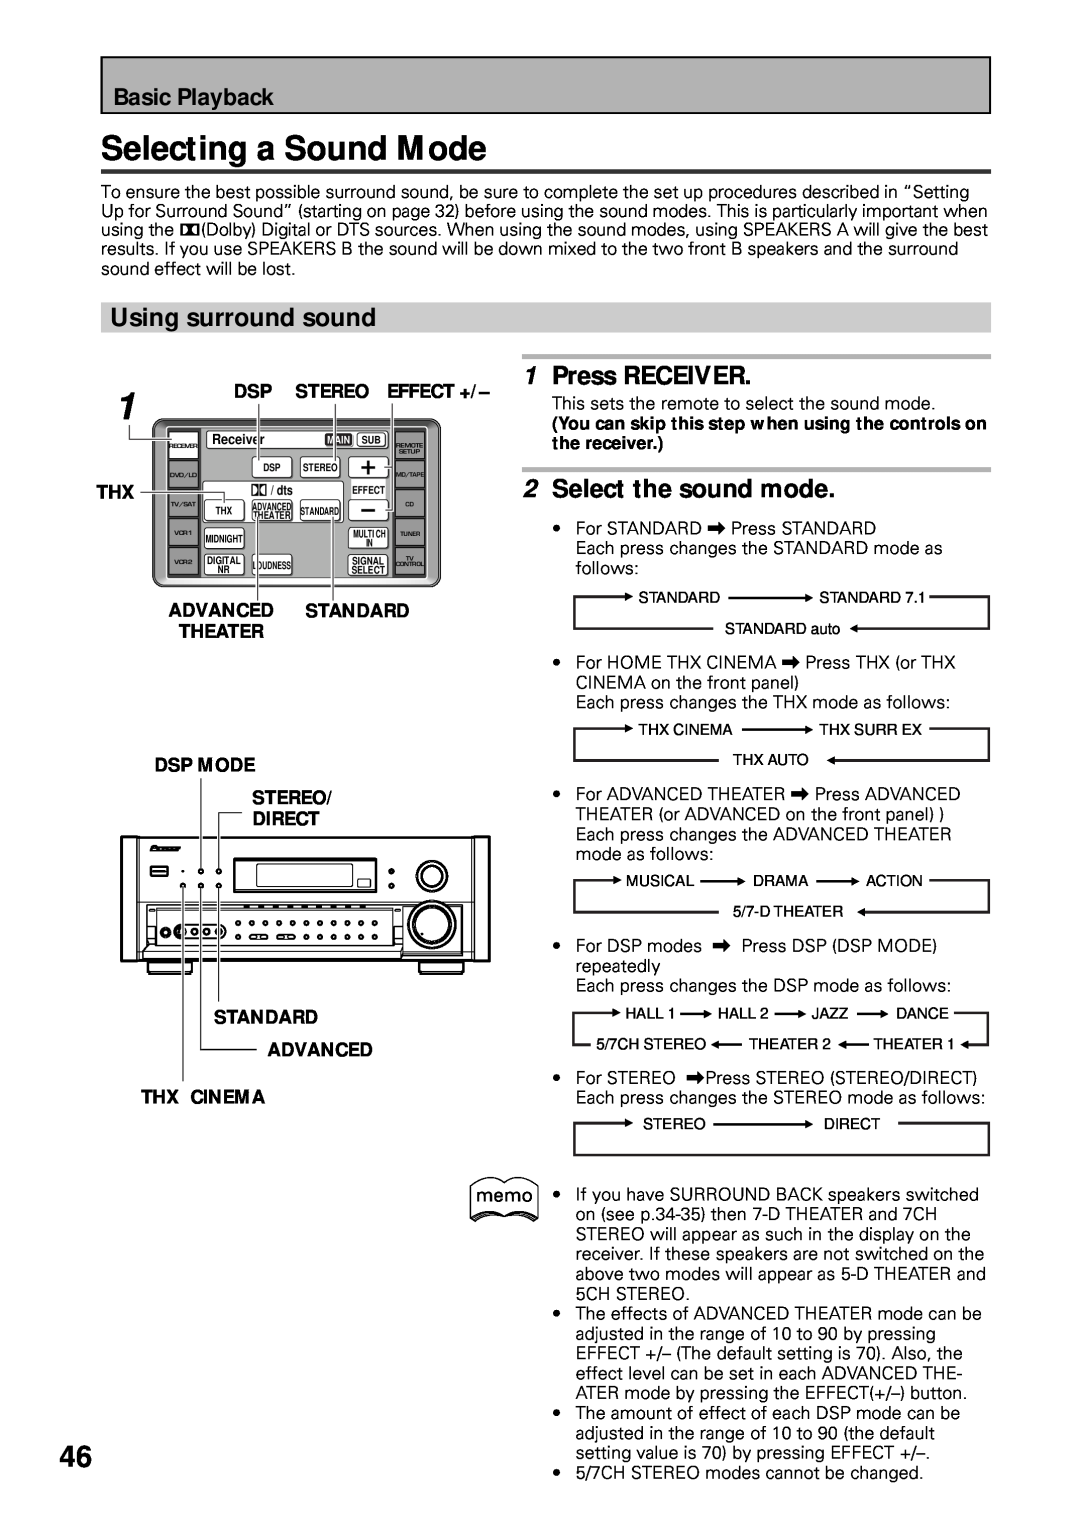 Pioneer VSX-39TX manual Selecting a Sound Mode, Using surround sound, Press RECEIVER, Select the sound mode, Basic Playback 